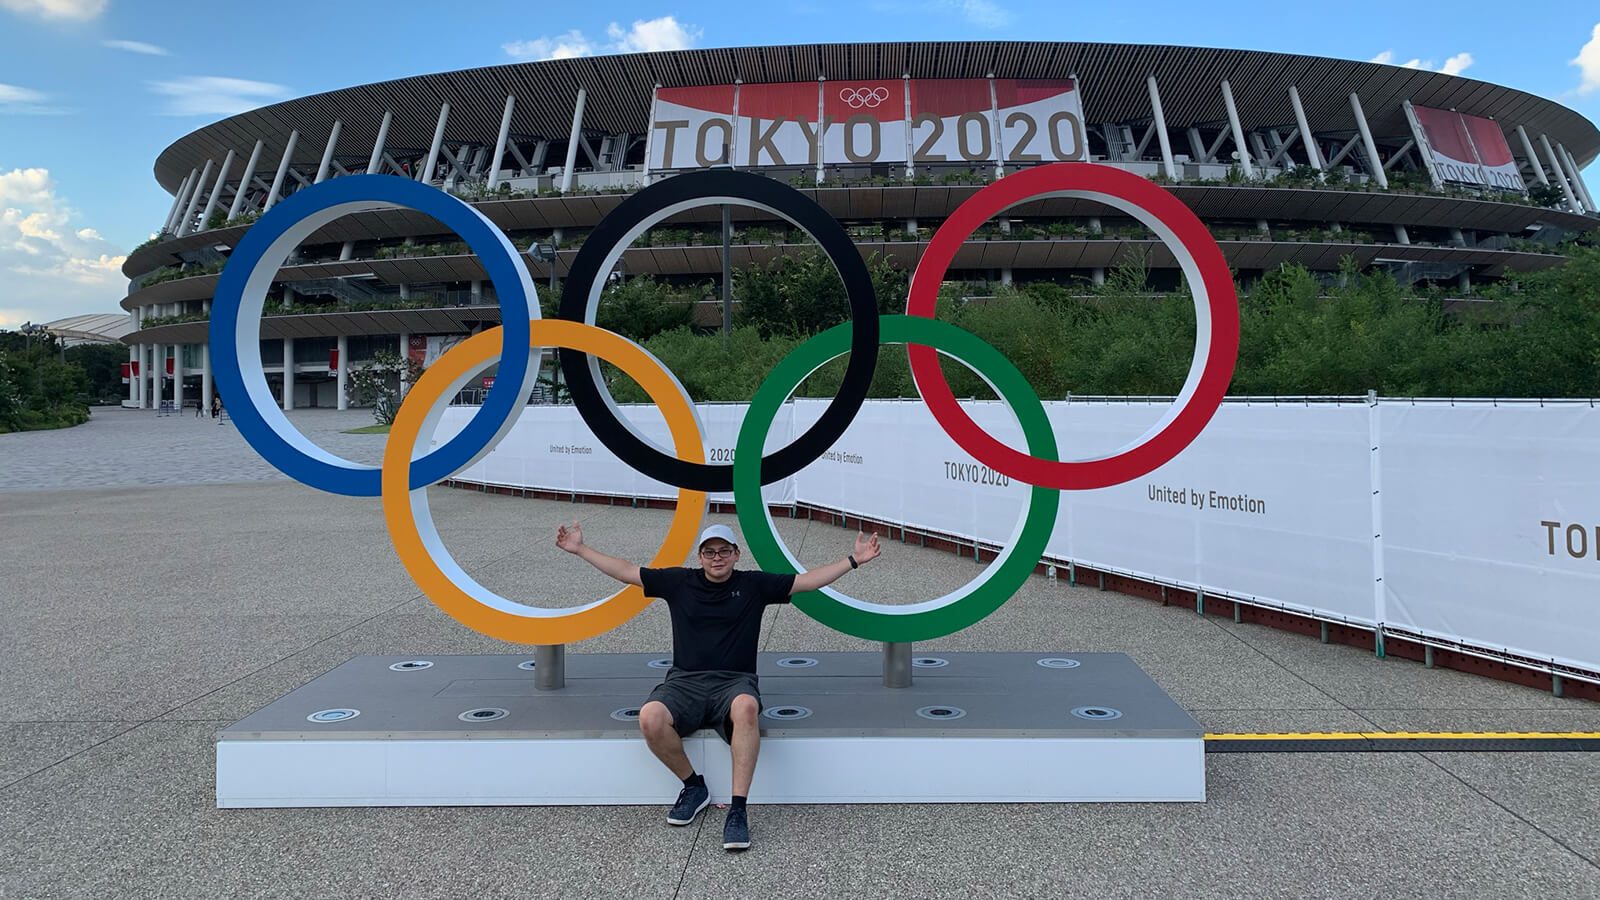 Grad Andrew Molina sits outdoors with his arms spread in front of a set of Olympic rings. There is a stadium with a banner for the 2020 Tokyo Olympics behind him.